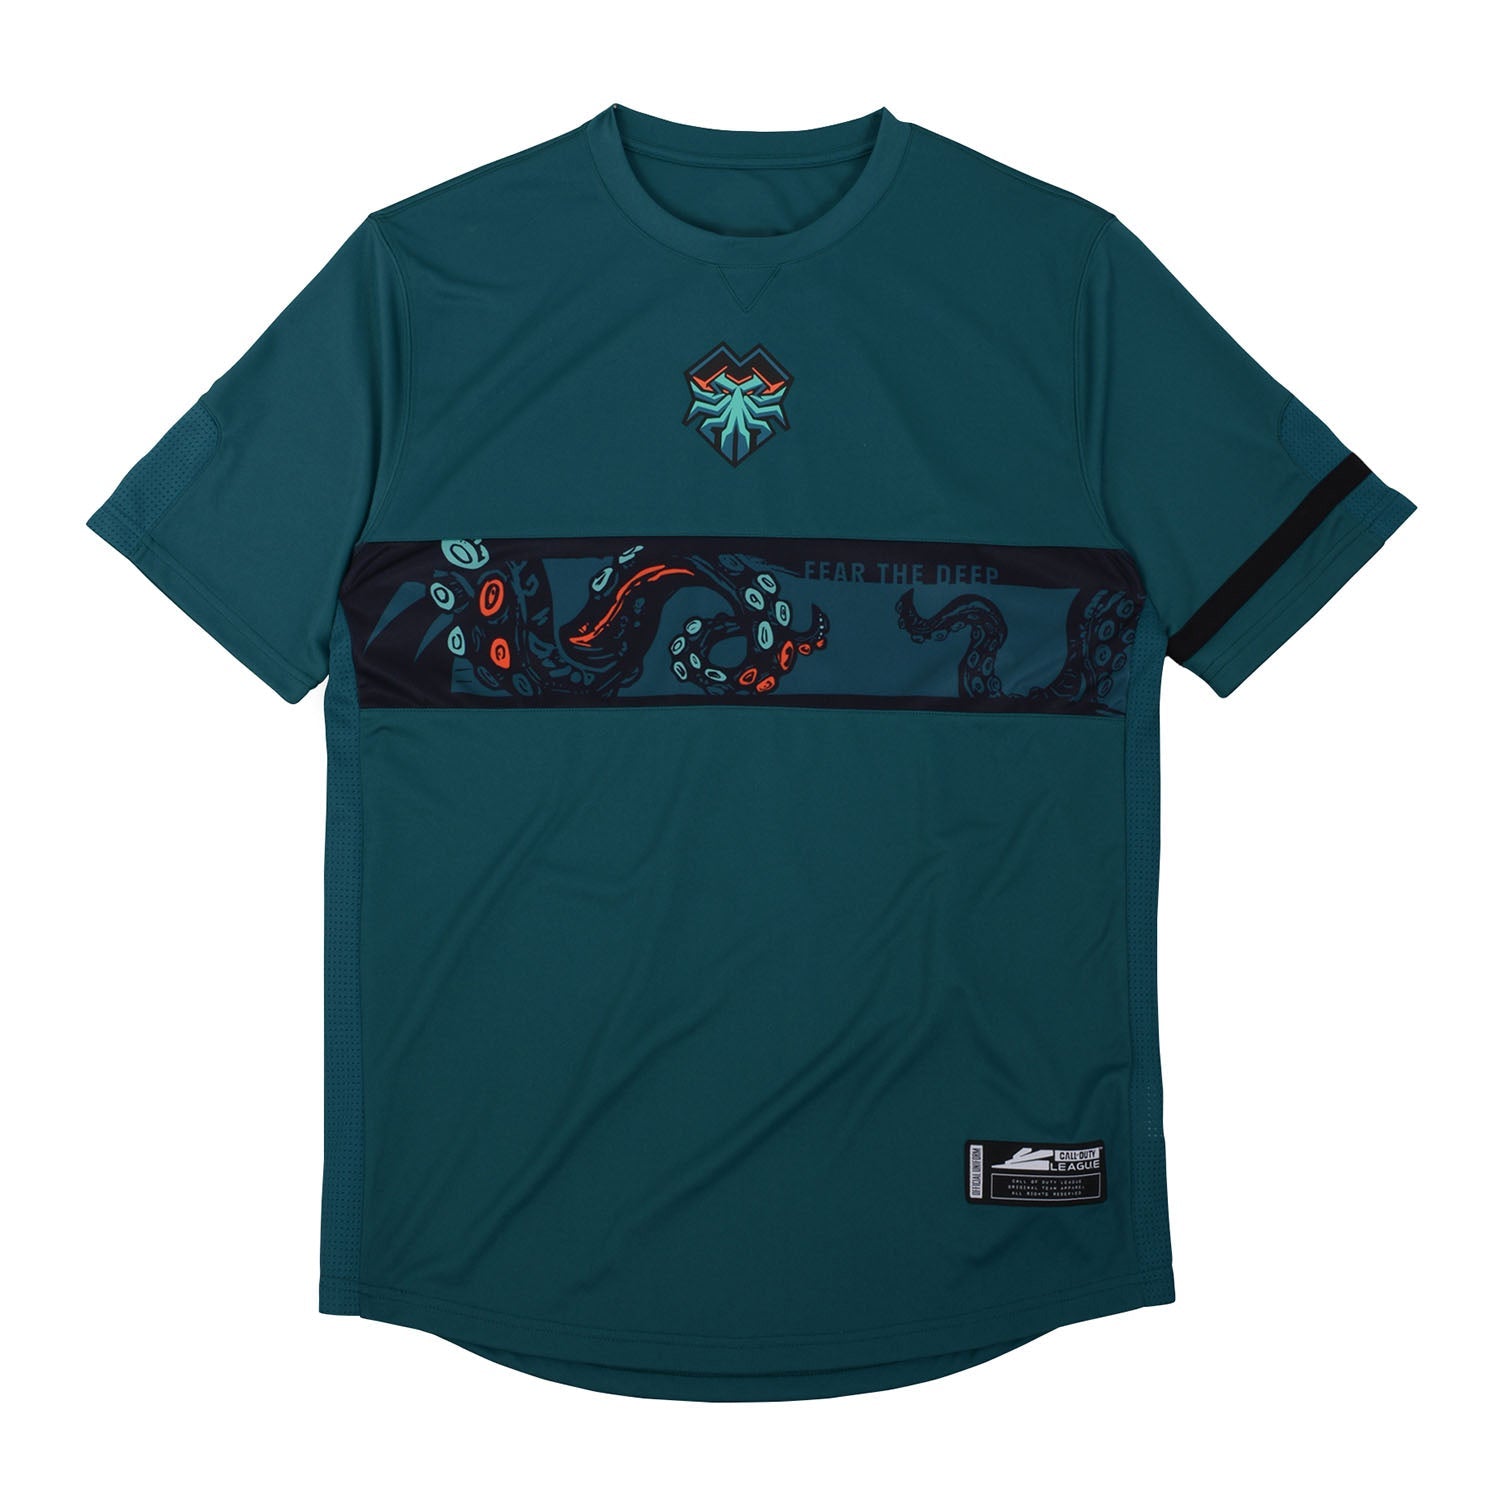 Florida Mutineers Teal Jersey - Front View